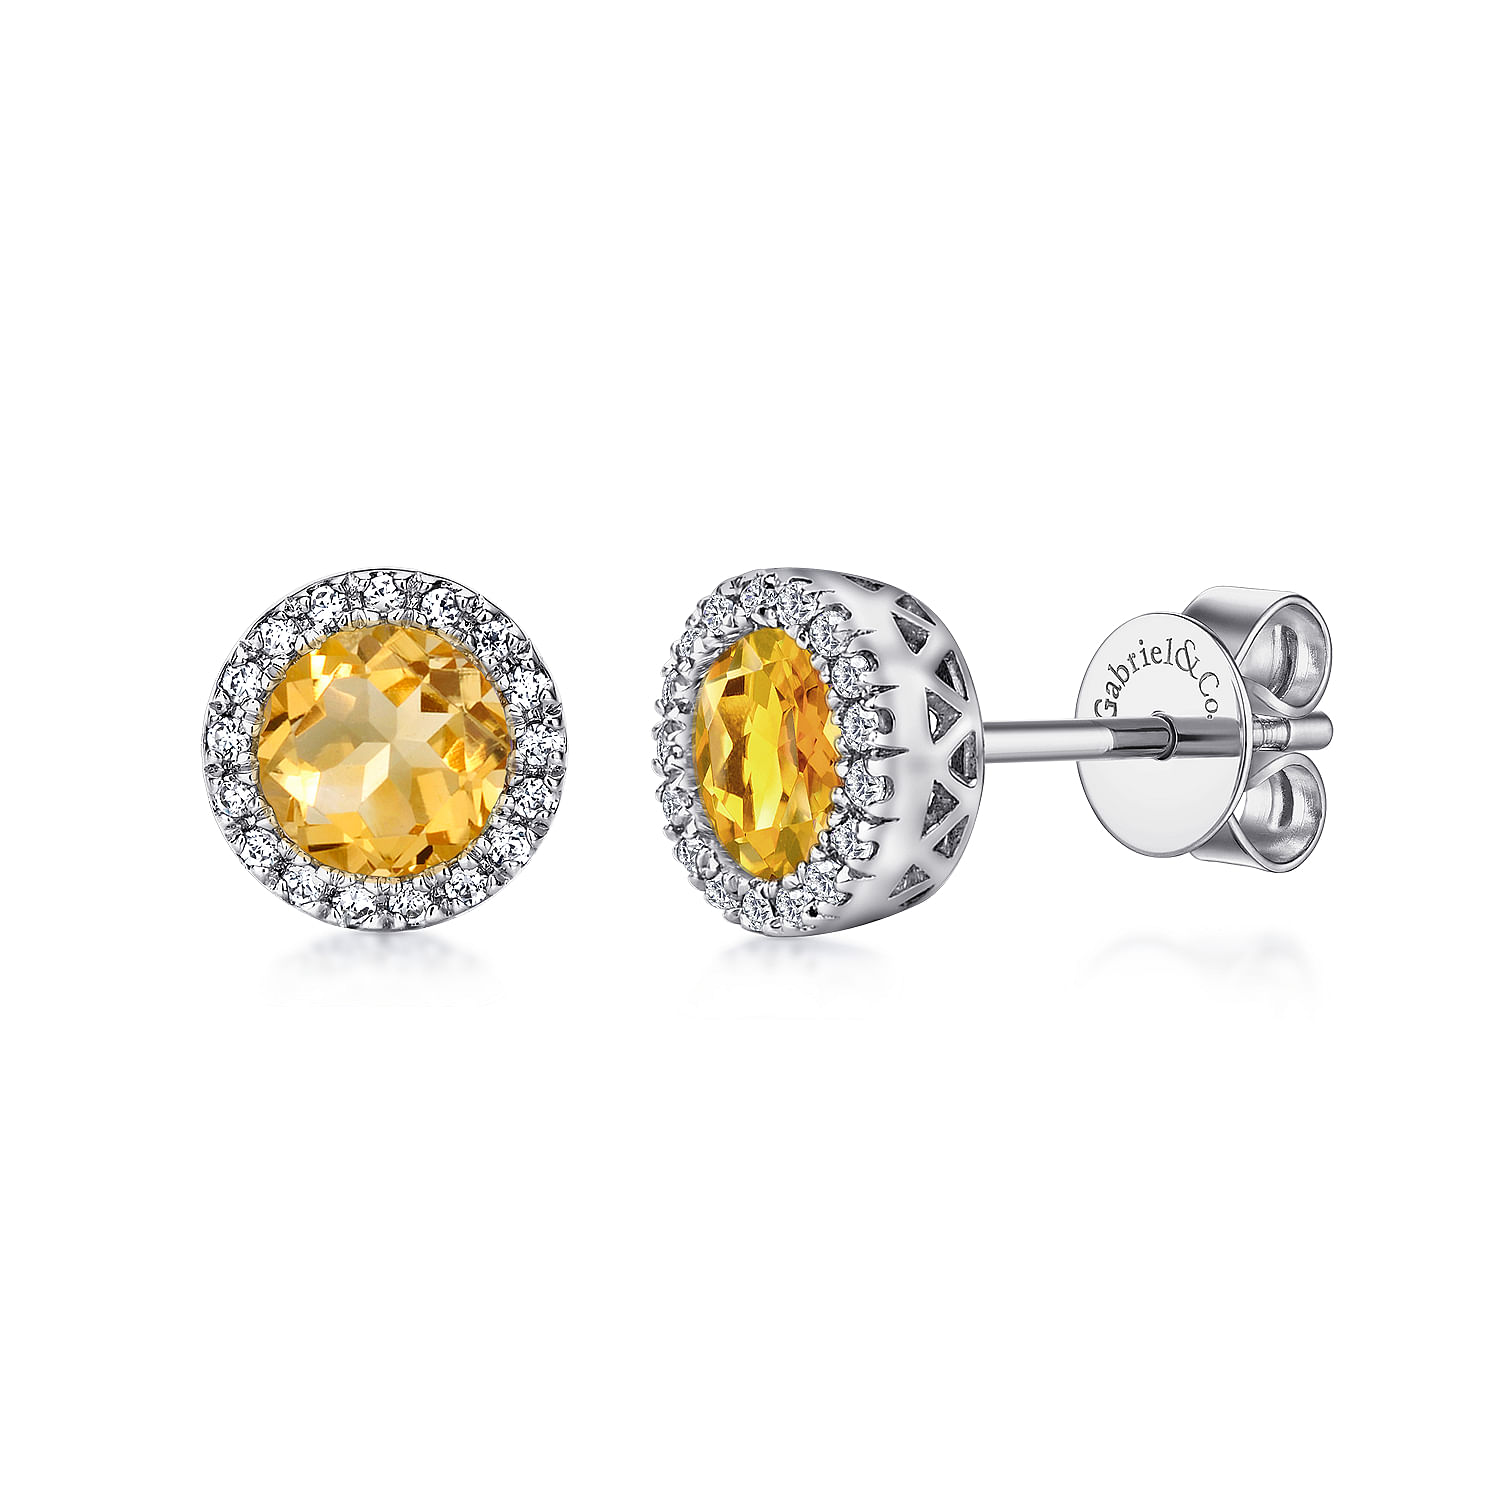 14K White Gold Round Halo Citrine and Diamond Stud Earrings